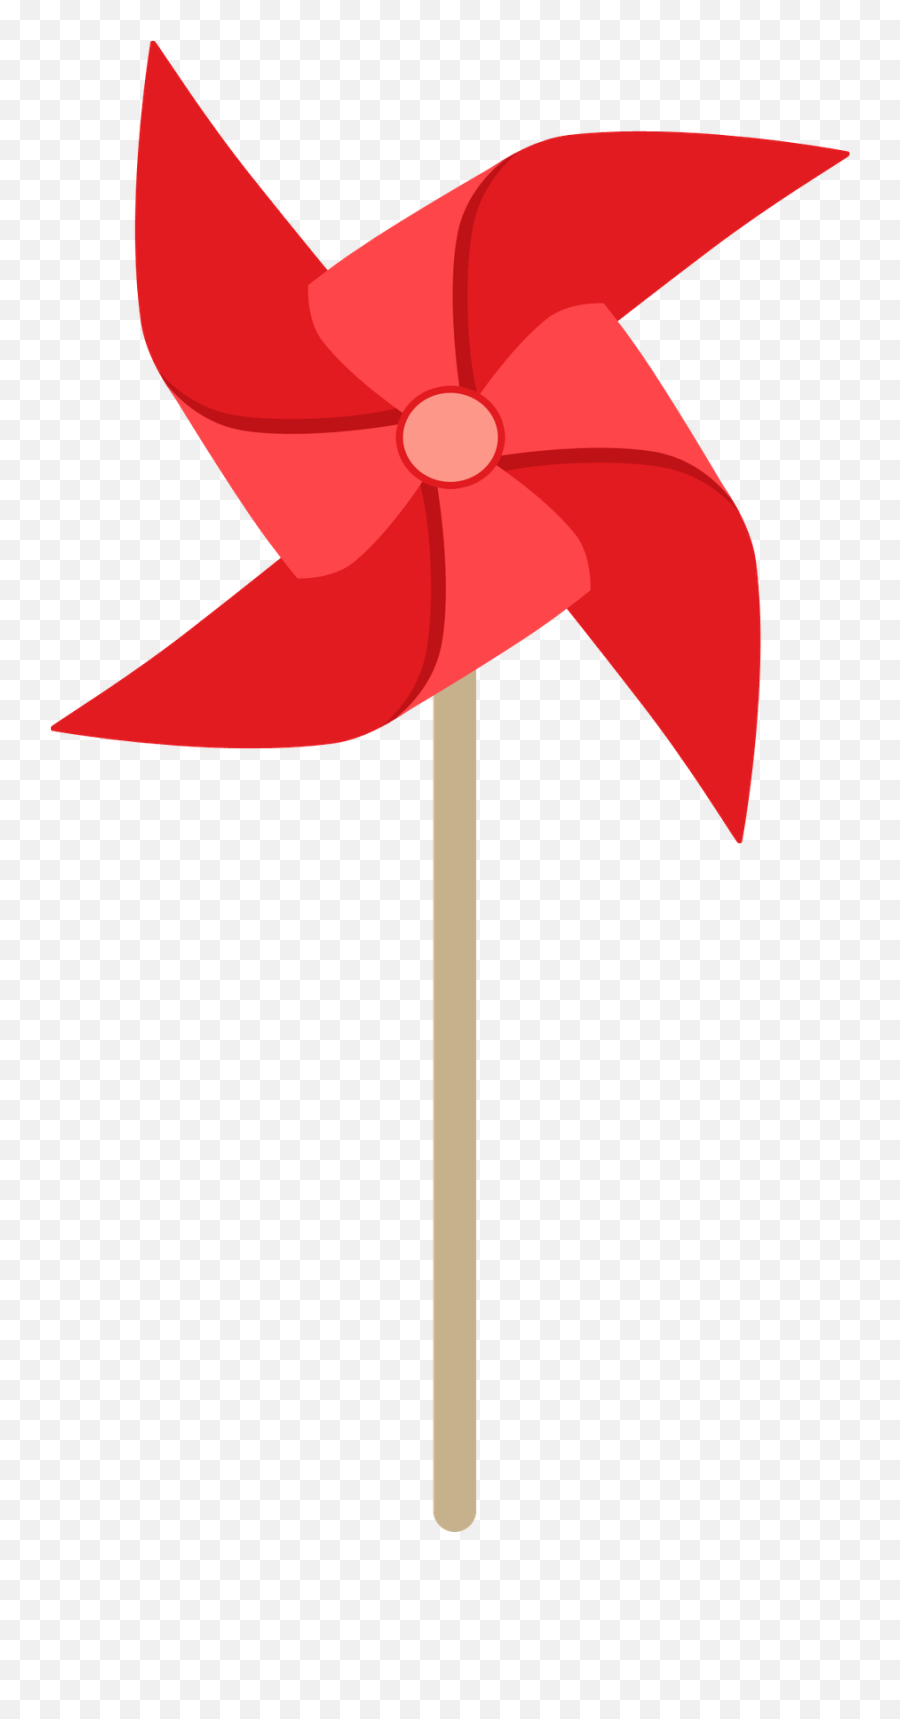 Wheel Clipart Windmill Picture 2190103 Wheel Clipart Windmill - Pinwheel Clipart Emoji,Windmill Clipart